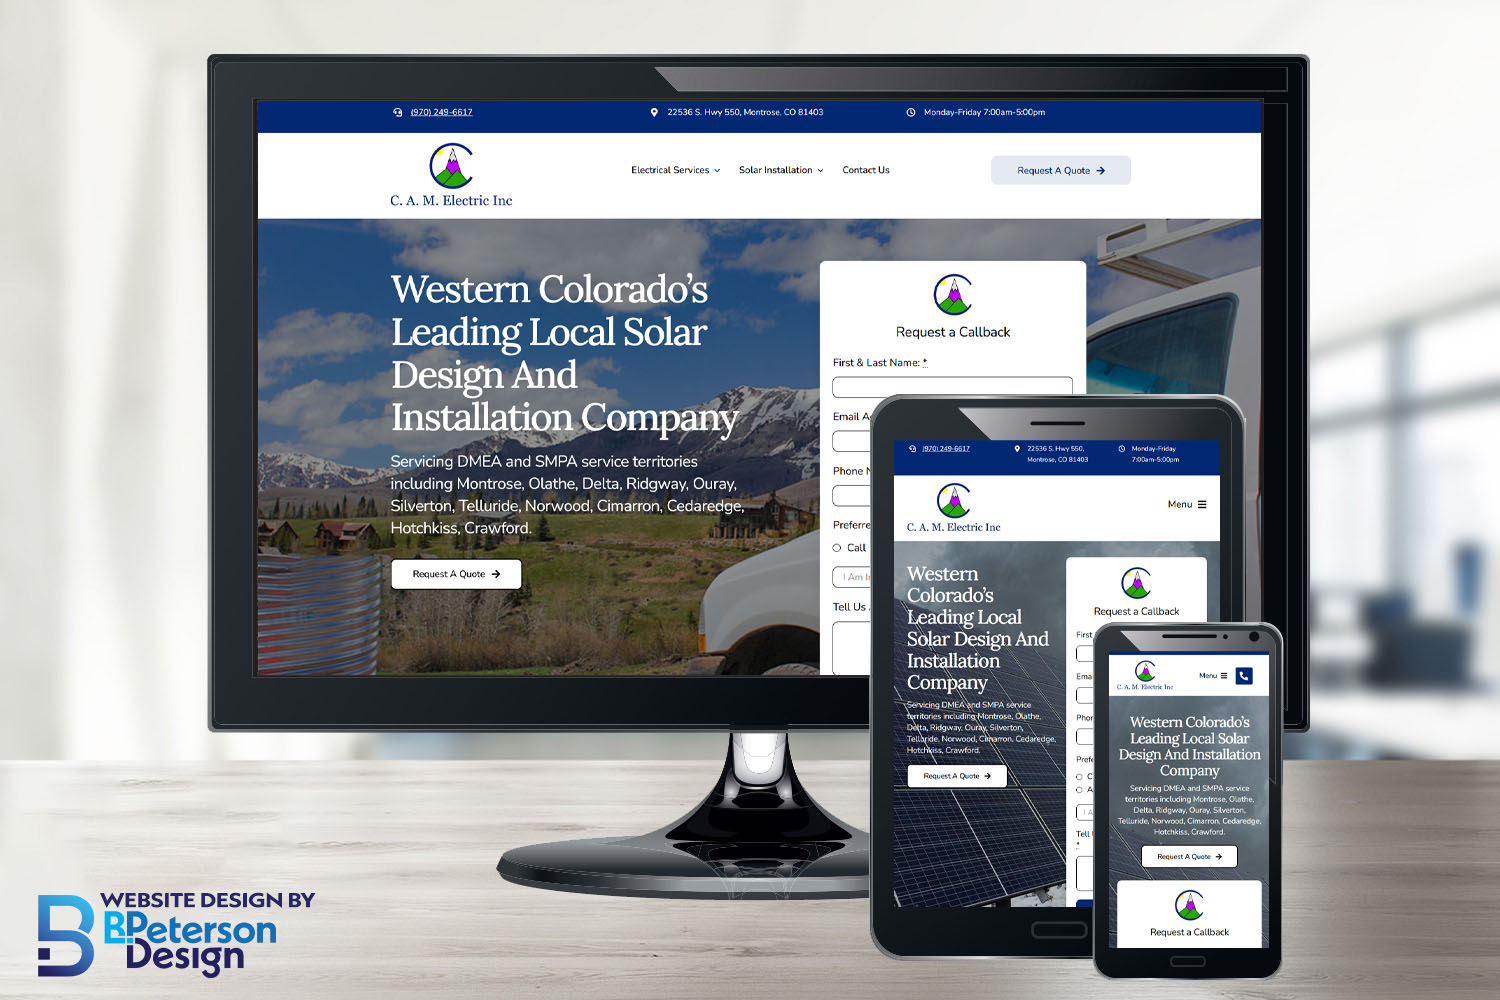 CAM Electric's new website displayed on responsive screens